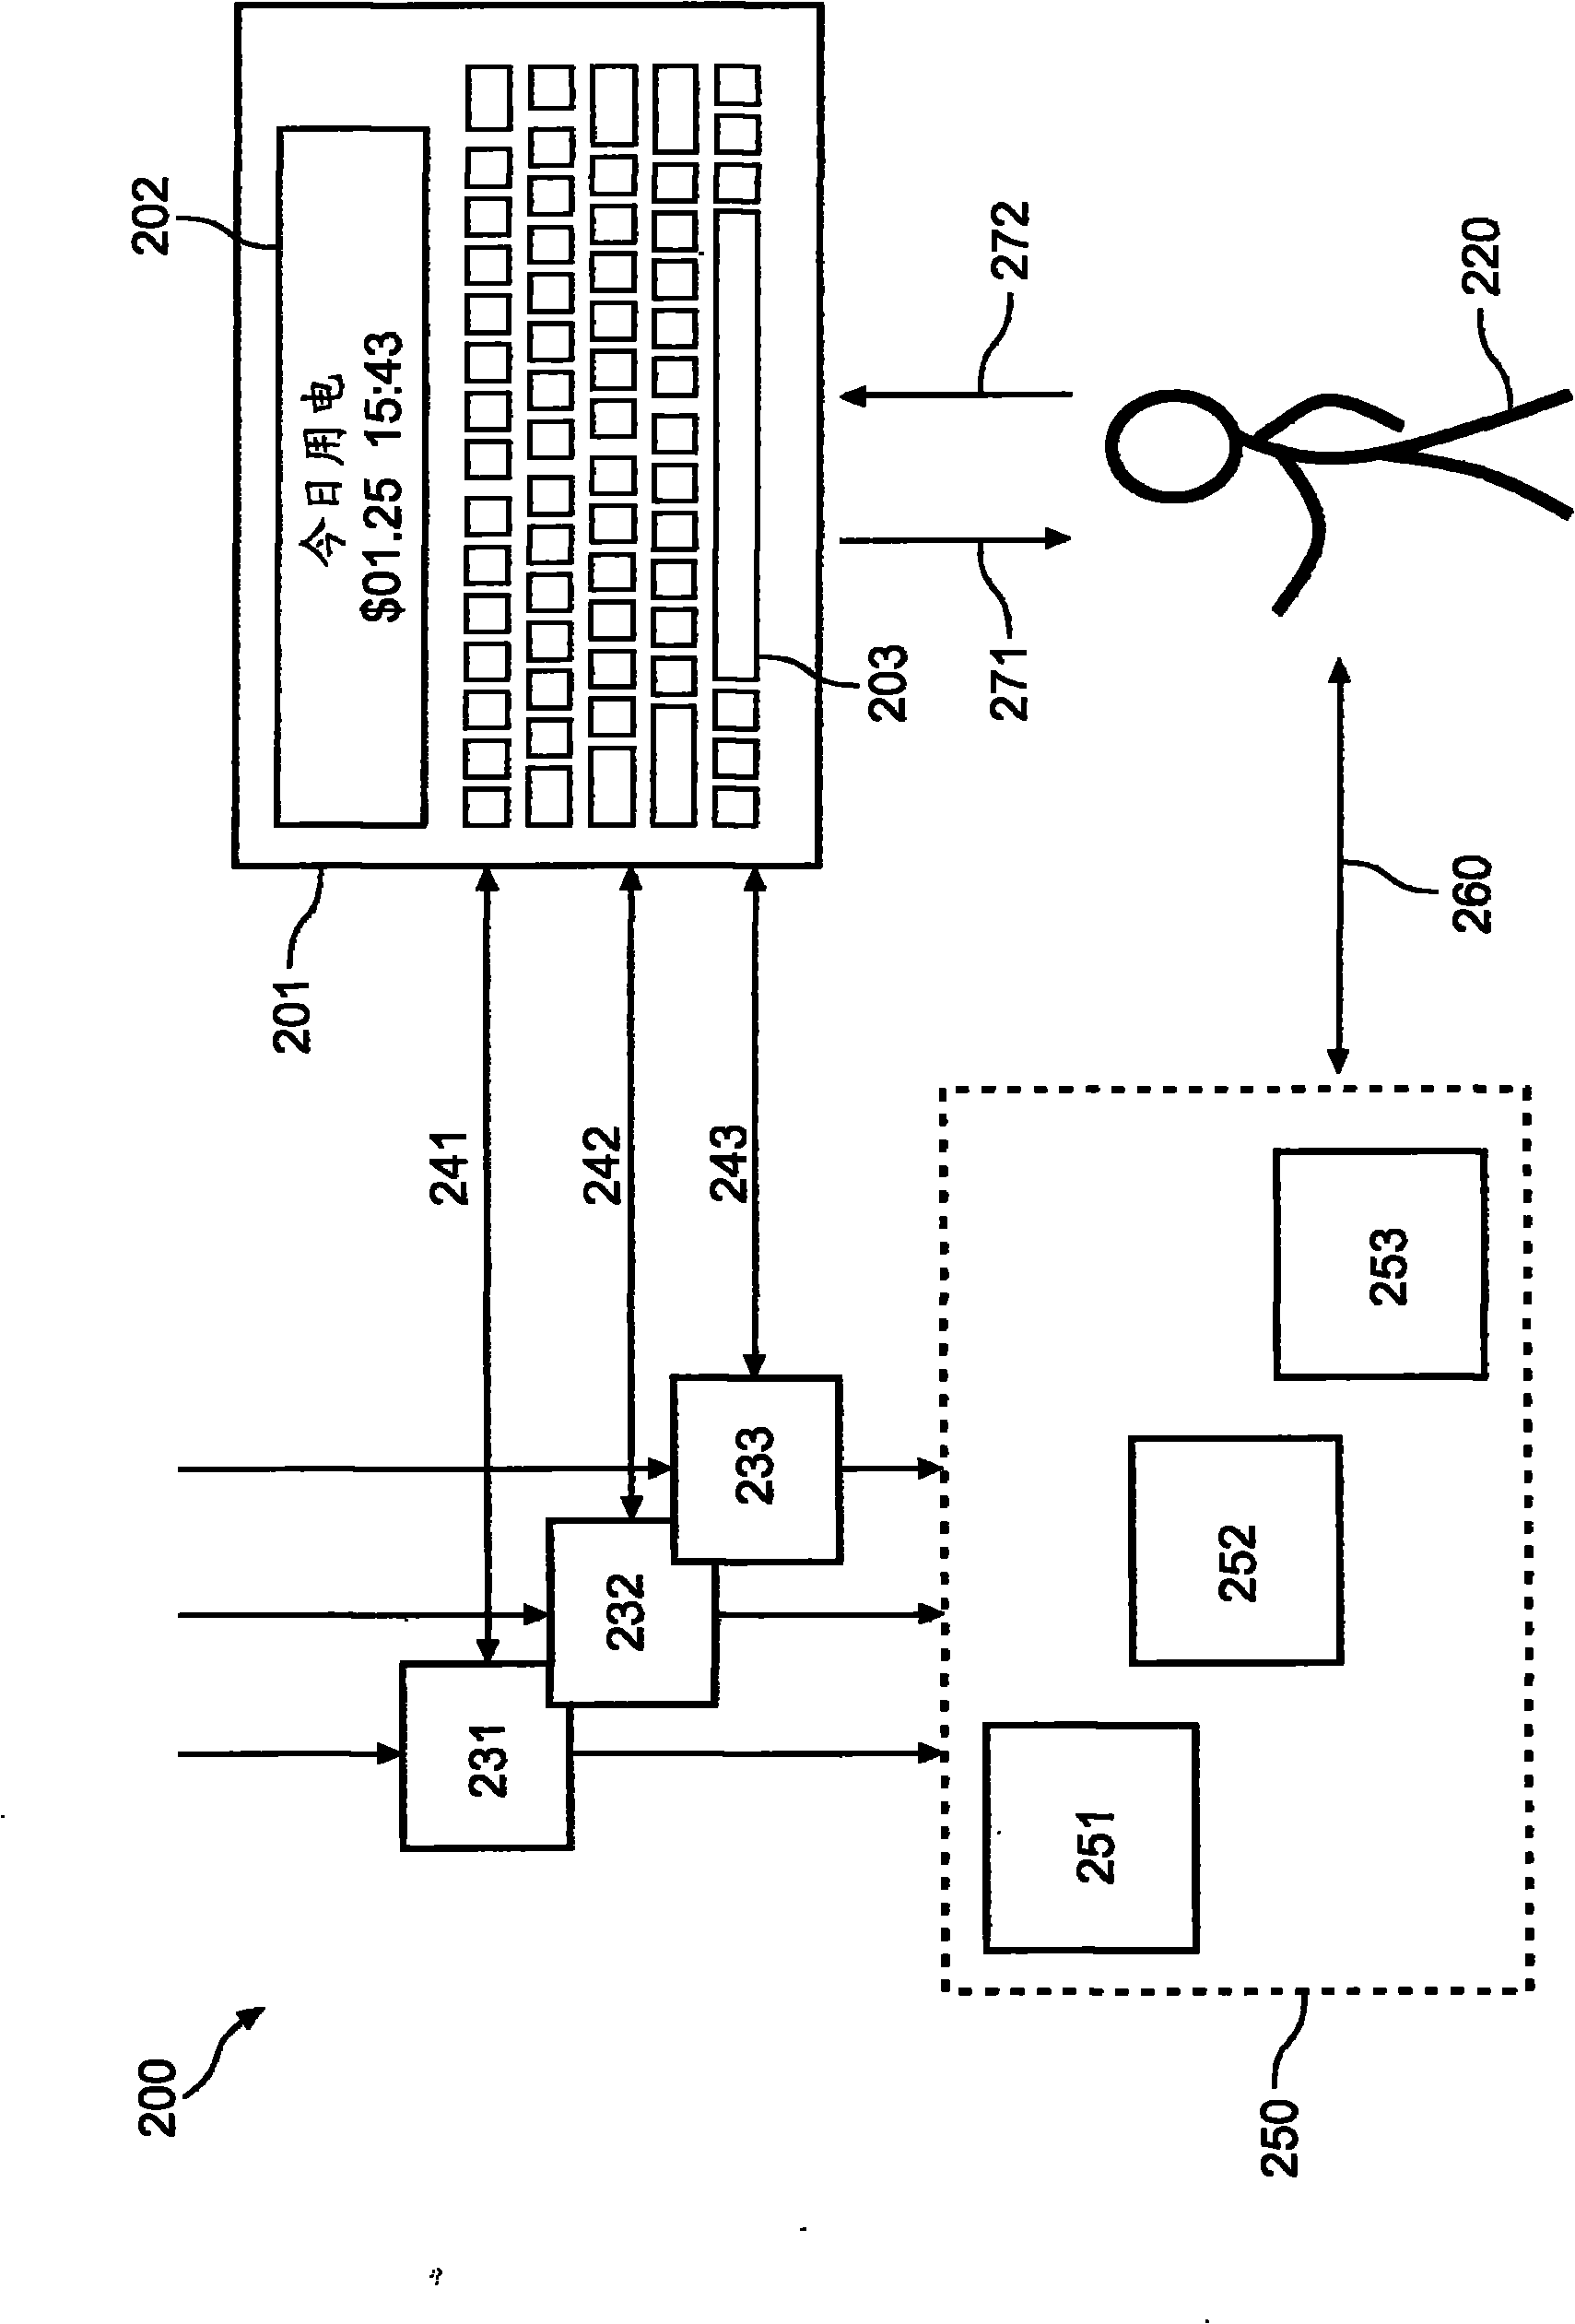 Method, apparatus and system for user-assisted resource usage determination